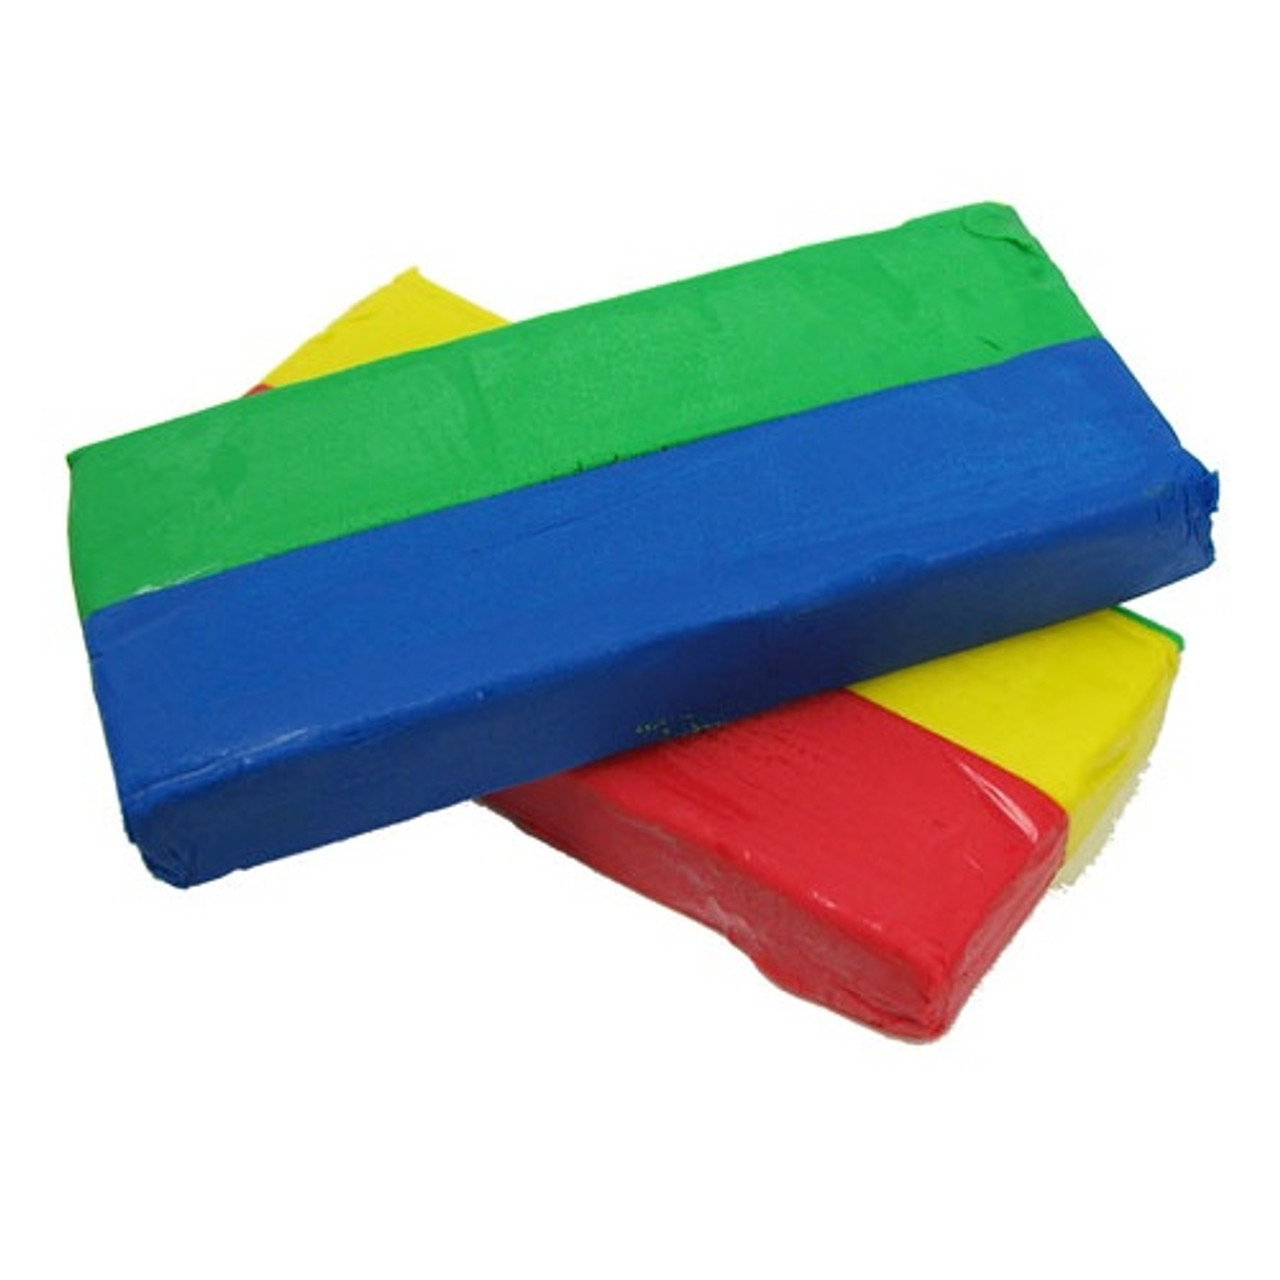 Crayola Modeling Clay for Kids - 4 Primary Colors